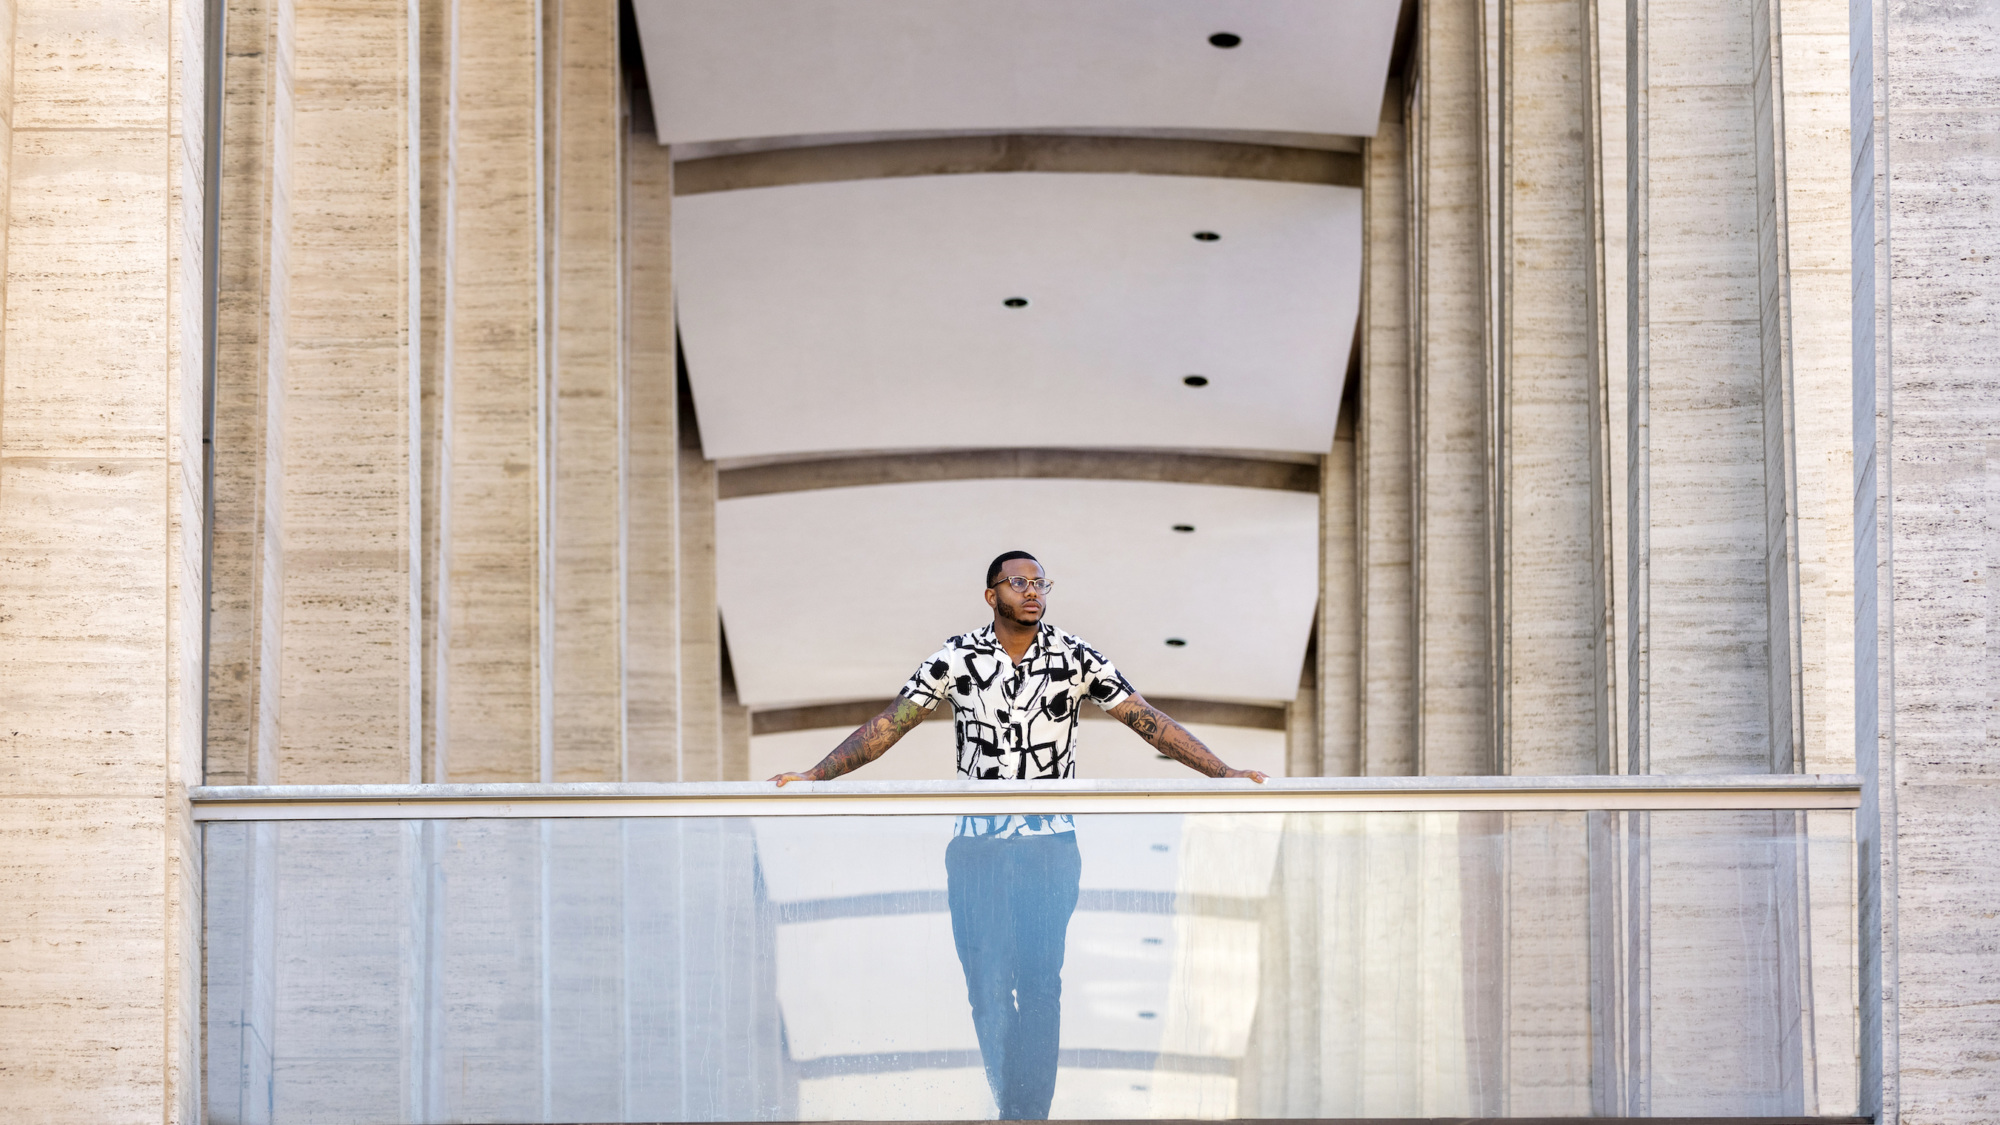 Chef Kwame Onwuachi at Lincoln Center